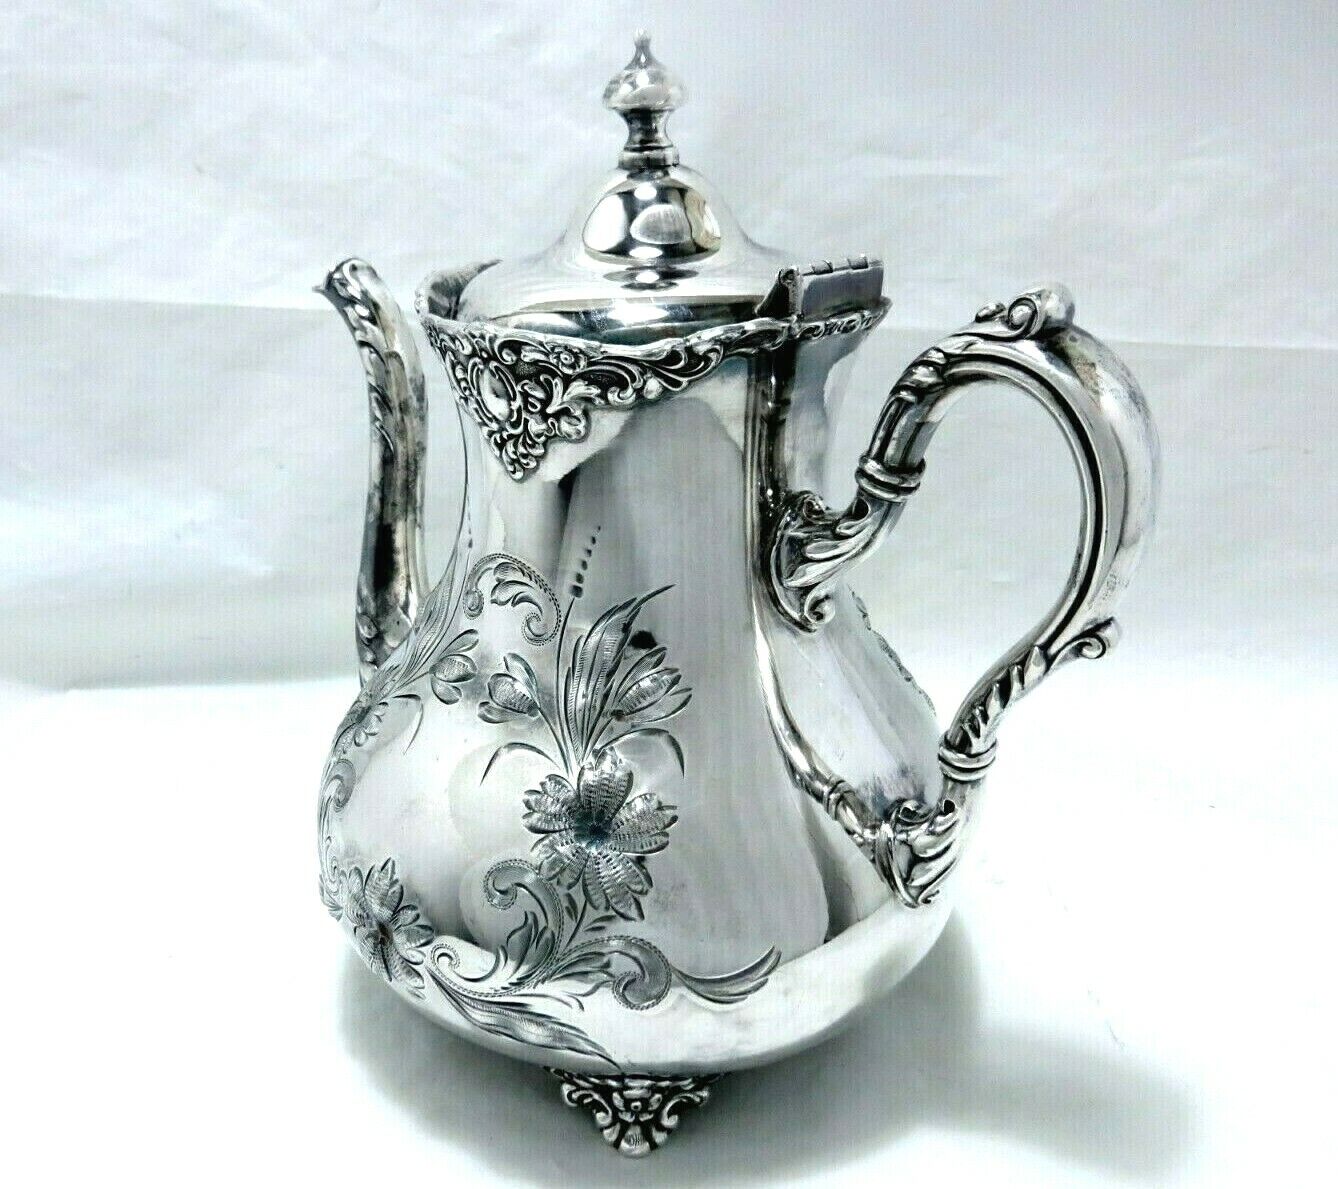 1895 AESTHETIC EMBOSSED ROCOCO MEDALLION VAN BERGH SILVER CO NY.COFFEE TEAPOT 